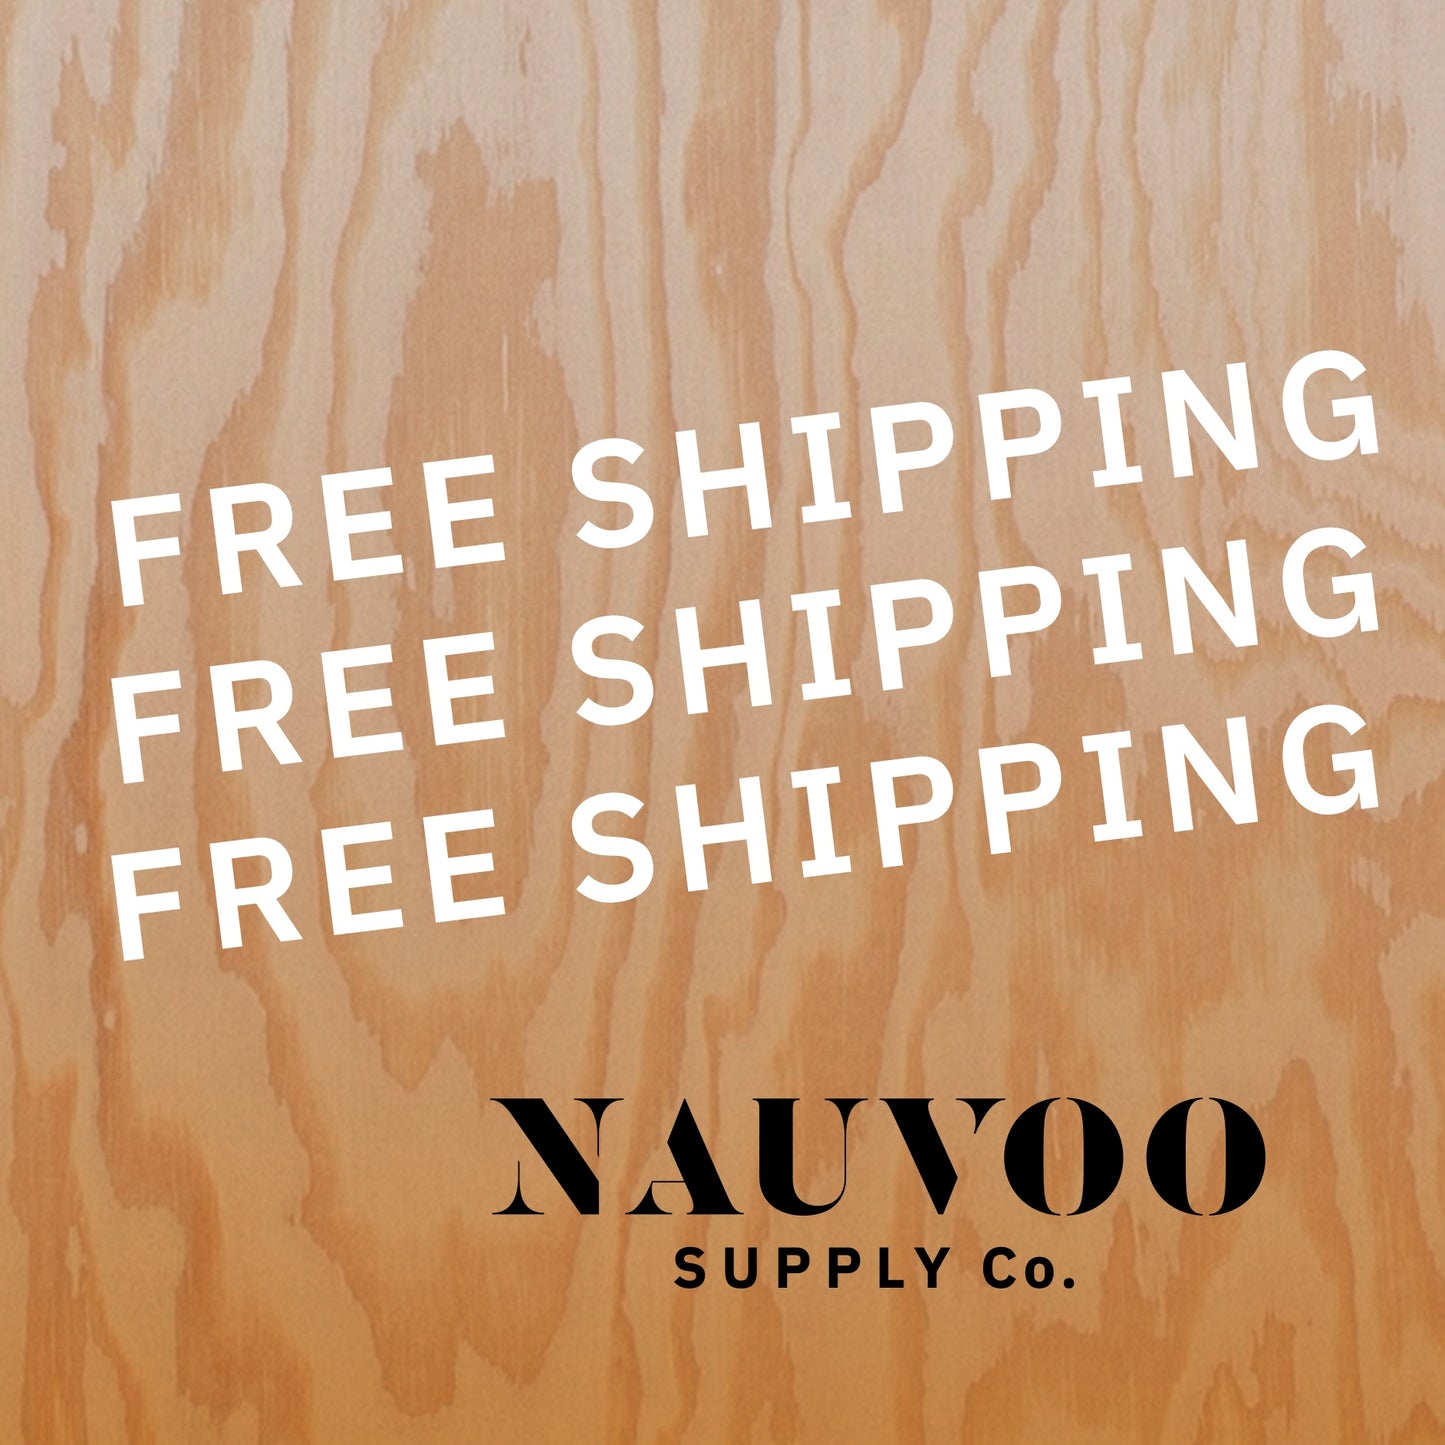 Free Shipping always - Nauvoo Supply Co